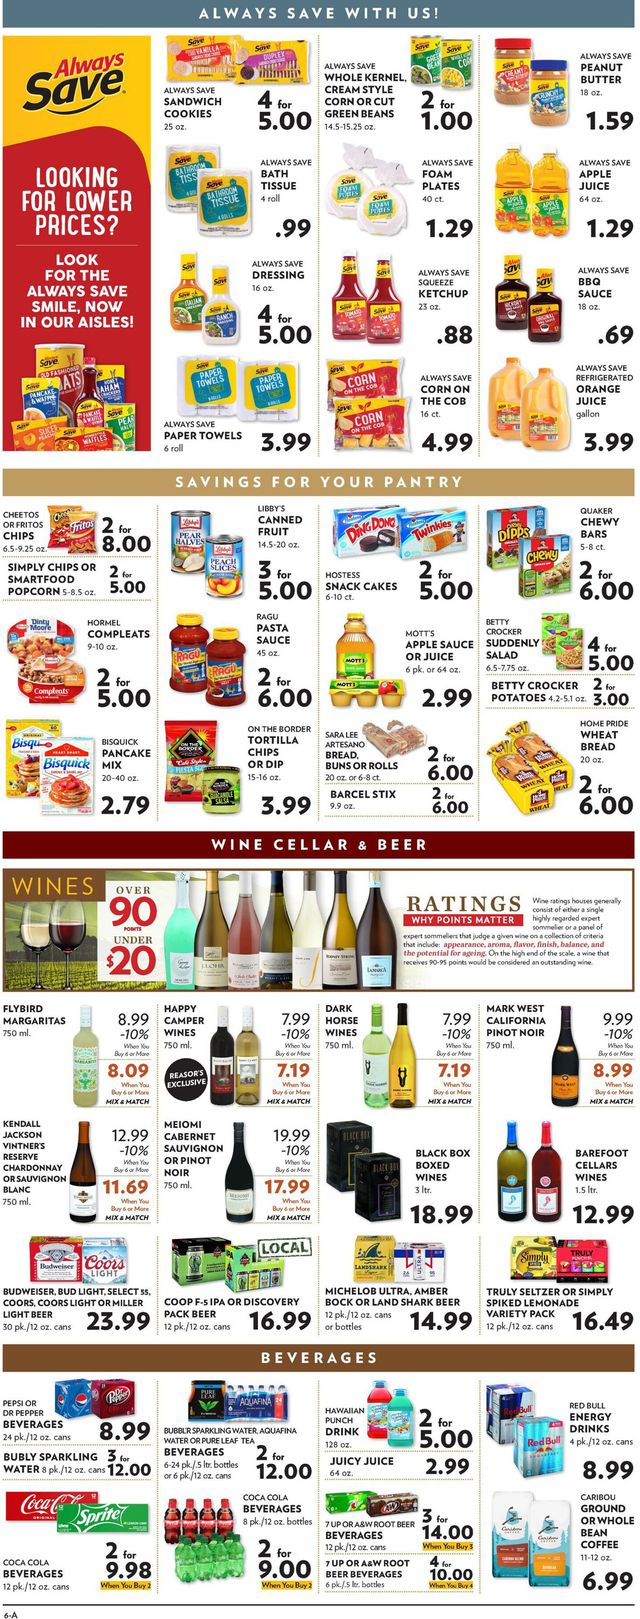 Reasor's Ad from 08/10/2022